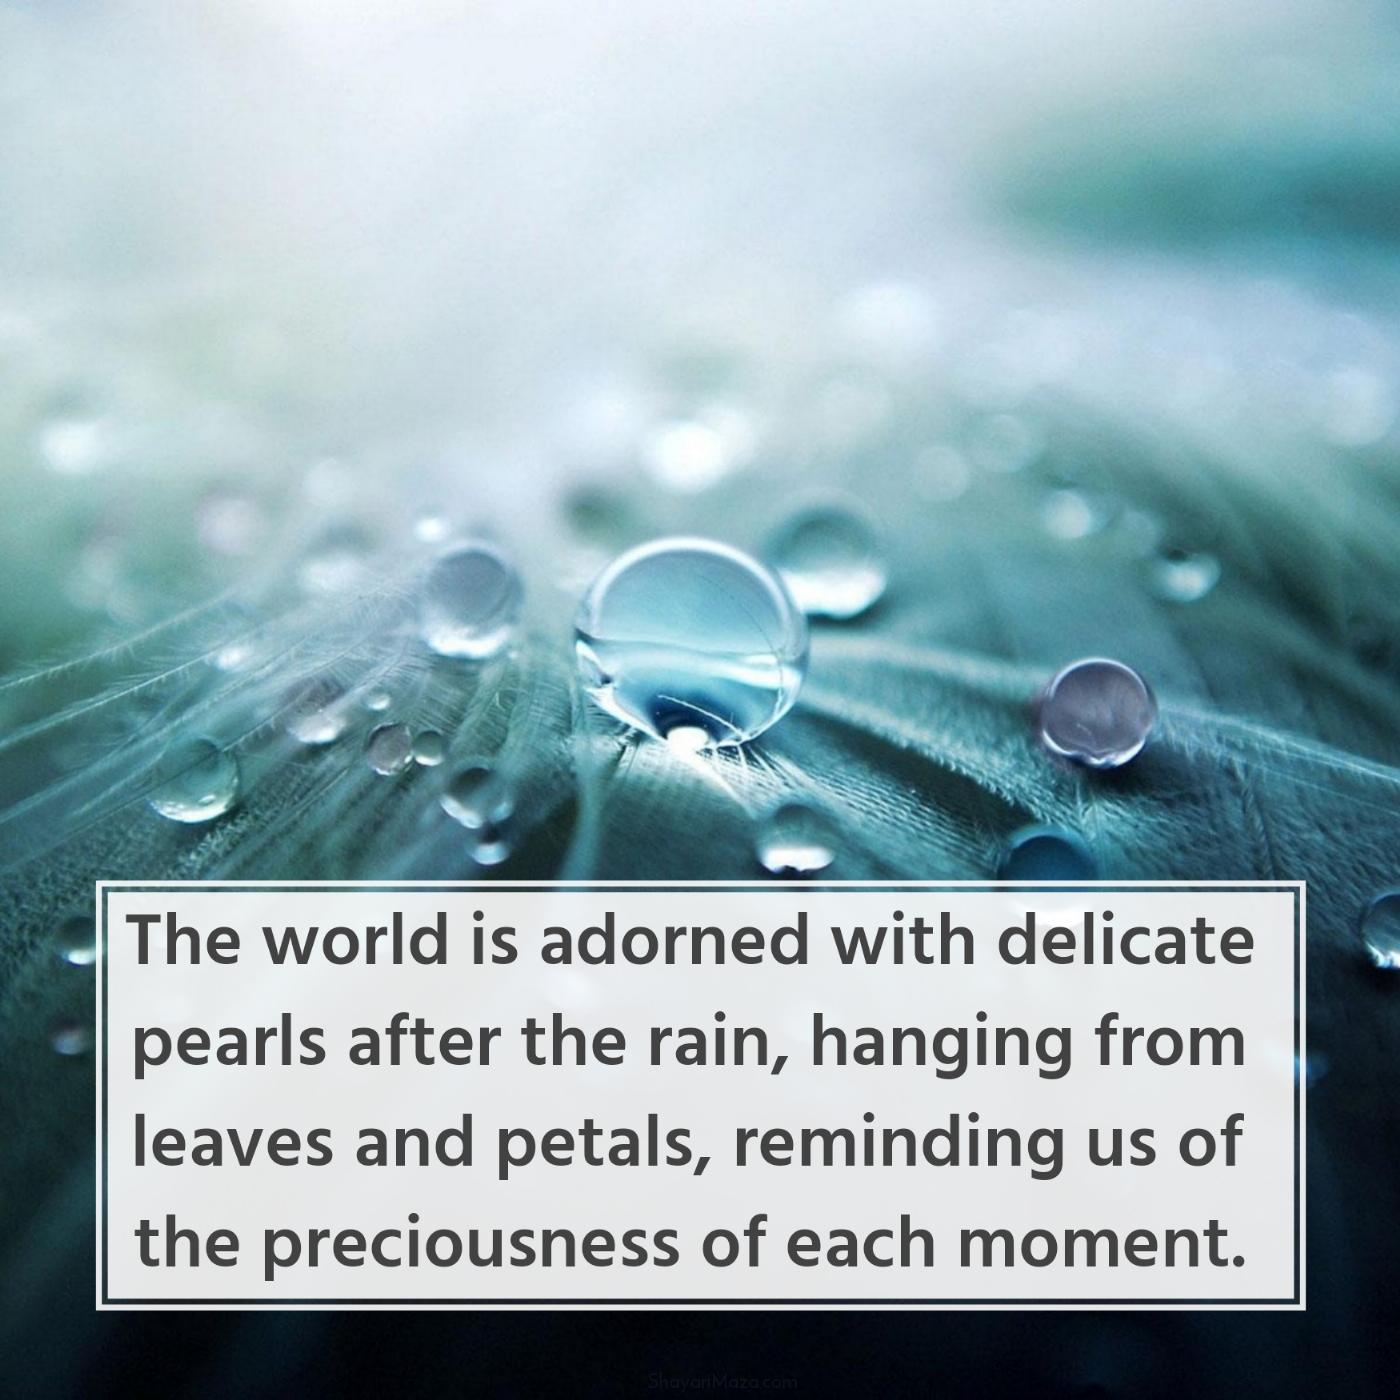 The world is adorned with delicate pearls after the rain